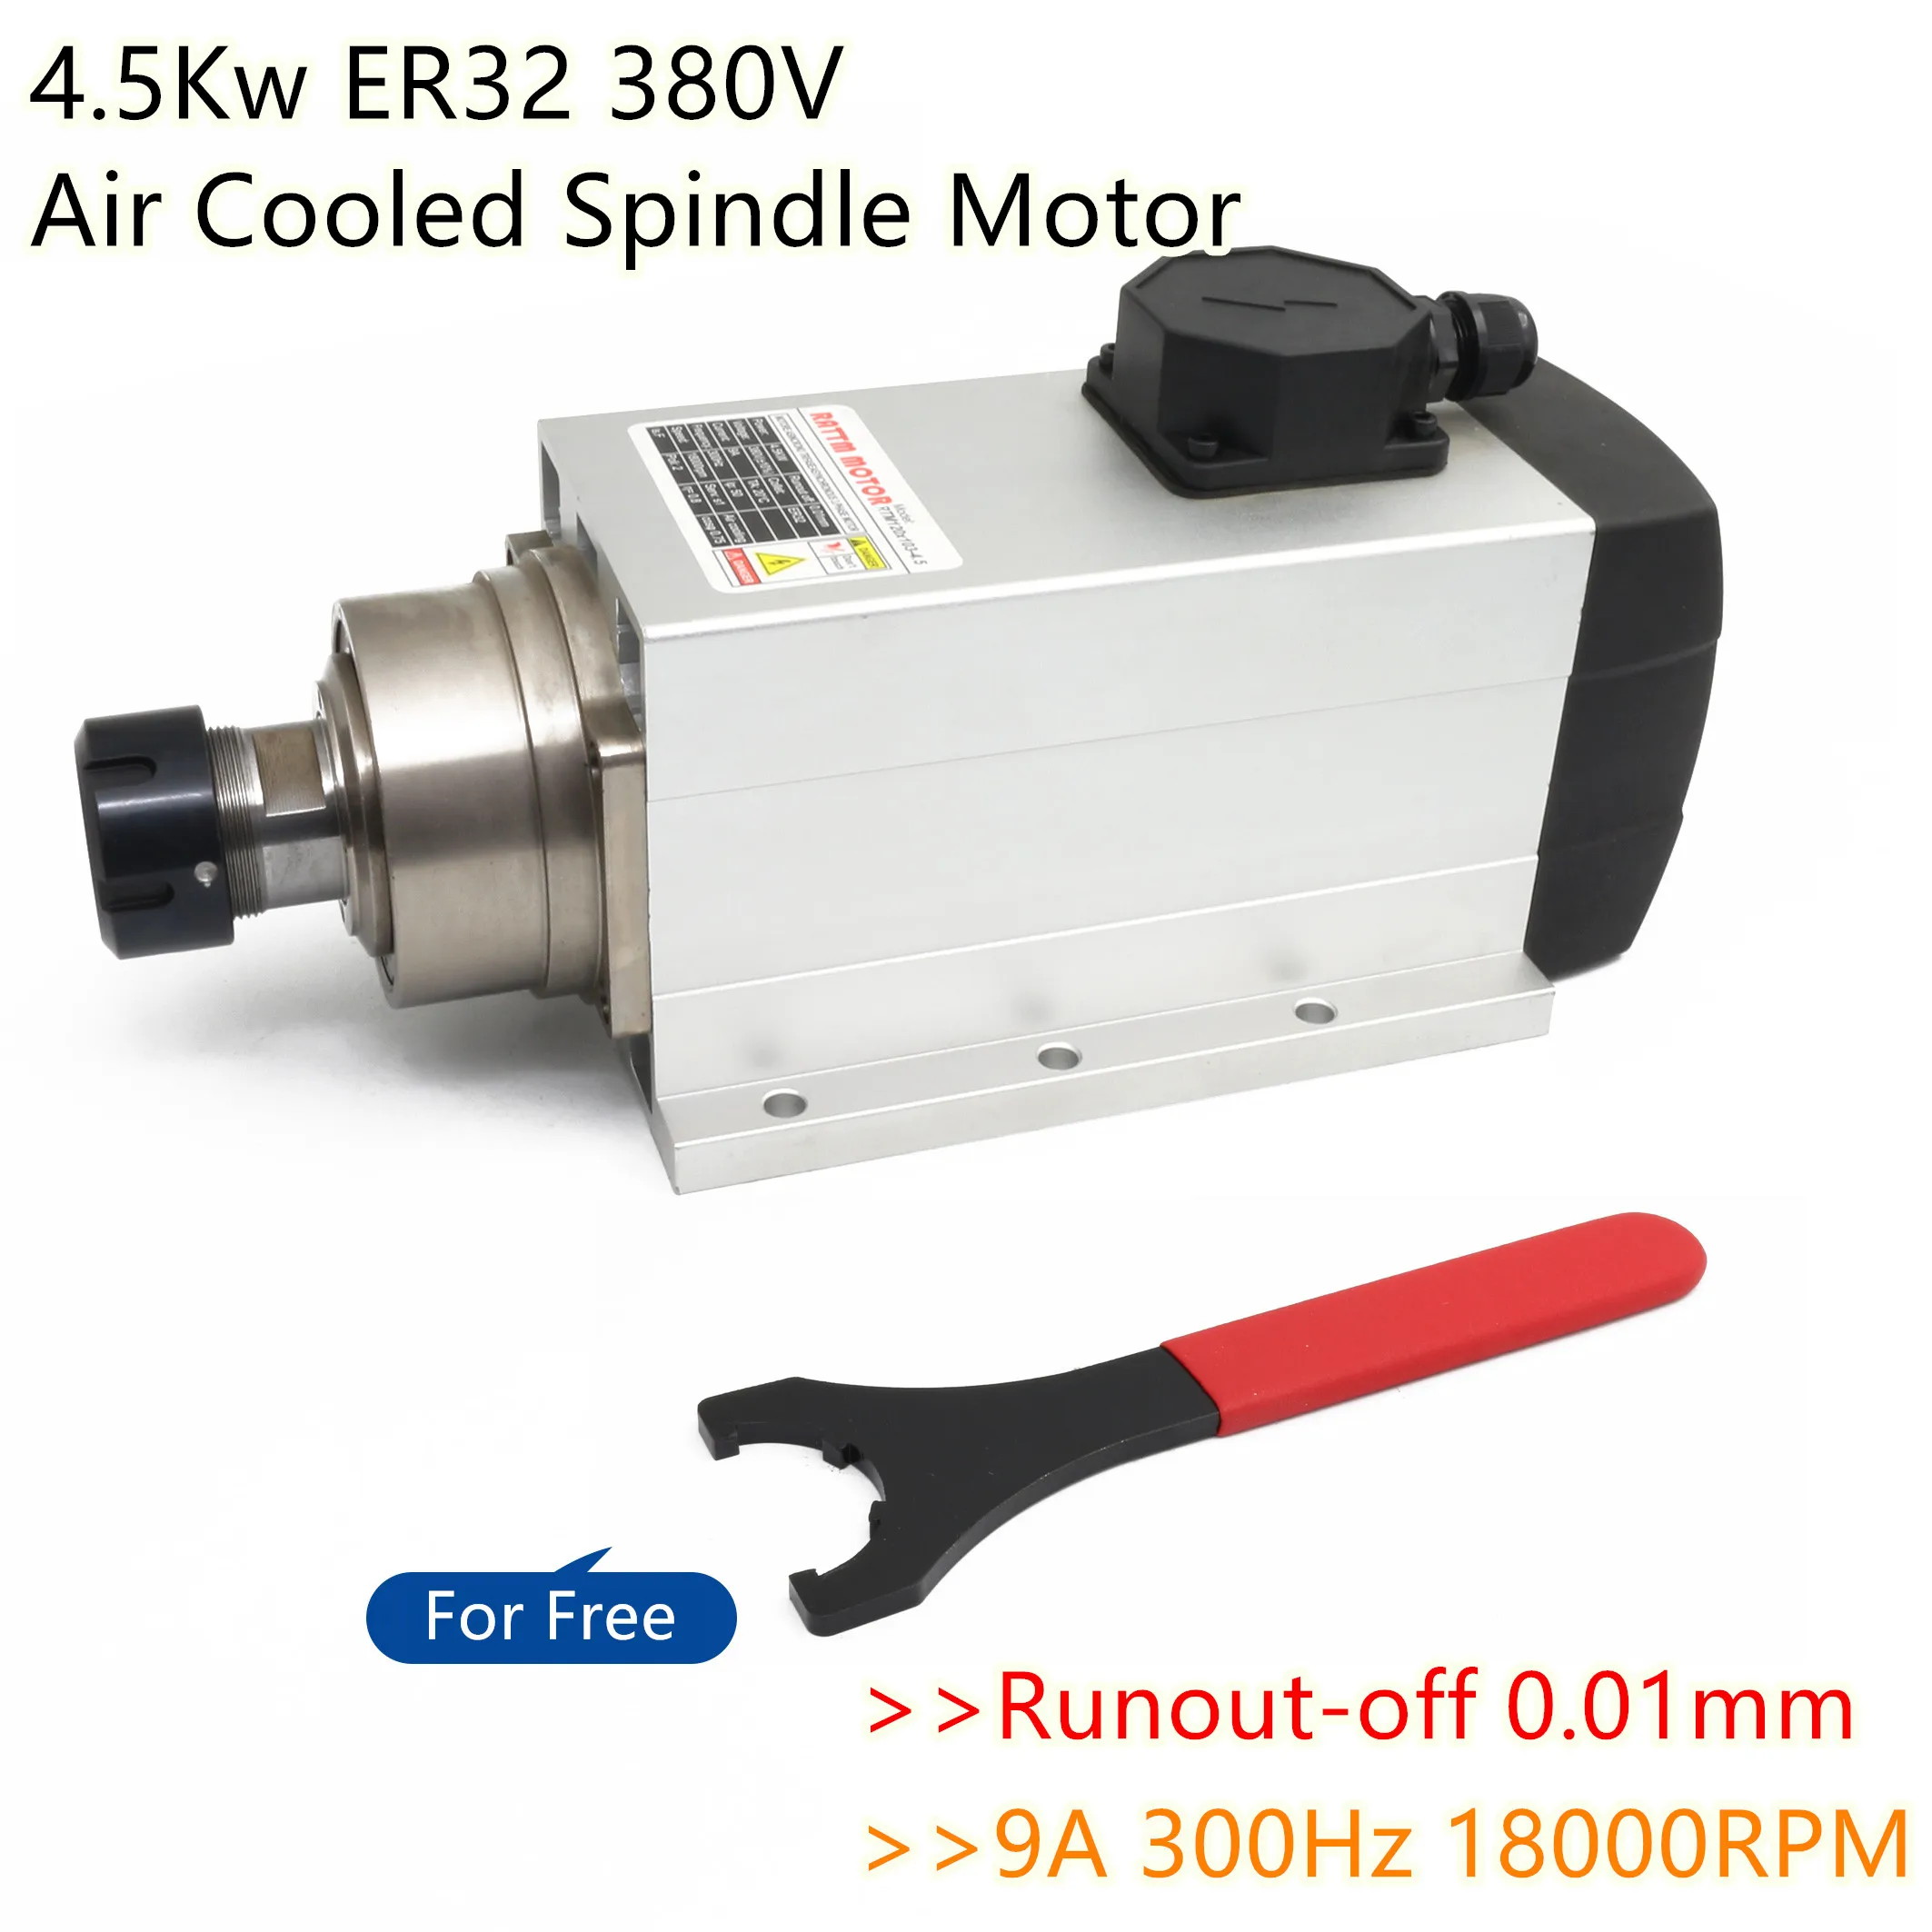 

4.5Kw ER32 Square Air Cooled Spindle Motor Runout-off 0.01mm 9A 300Hz 18000RPM 380V for CNC Engraving Milling Router Machine